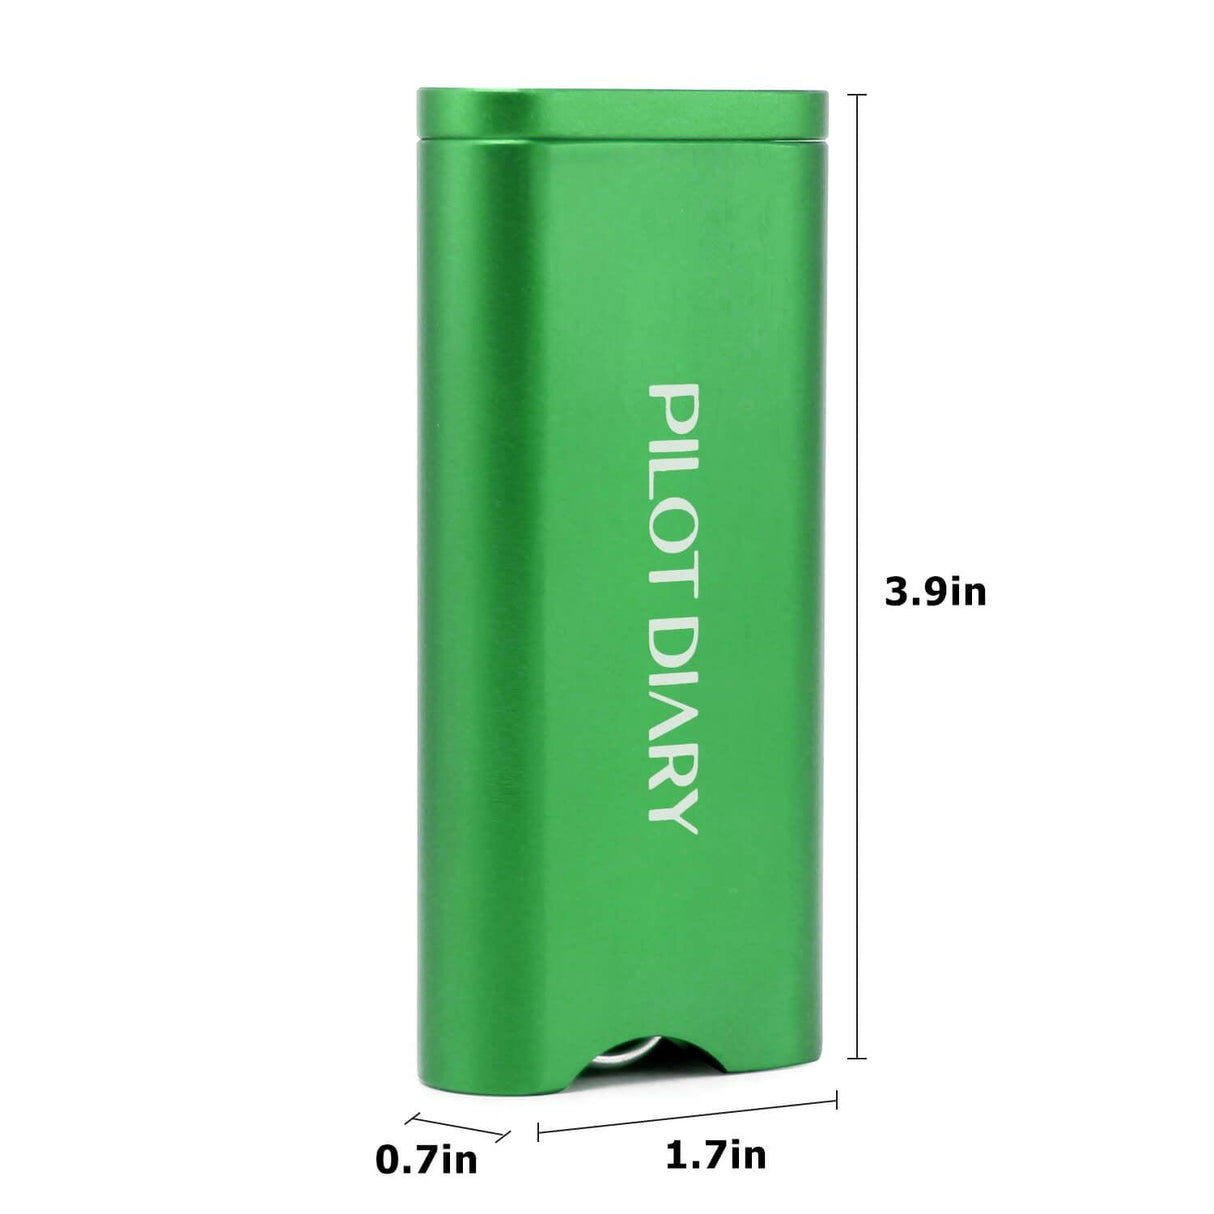 PILOT DIARY Metal Dugout One Hitter in Green - Front View with Size Dimensions